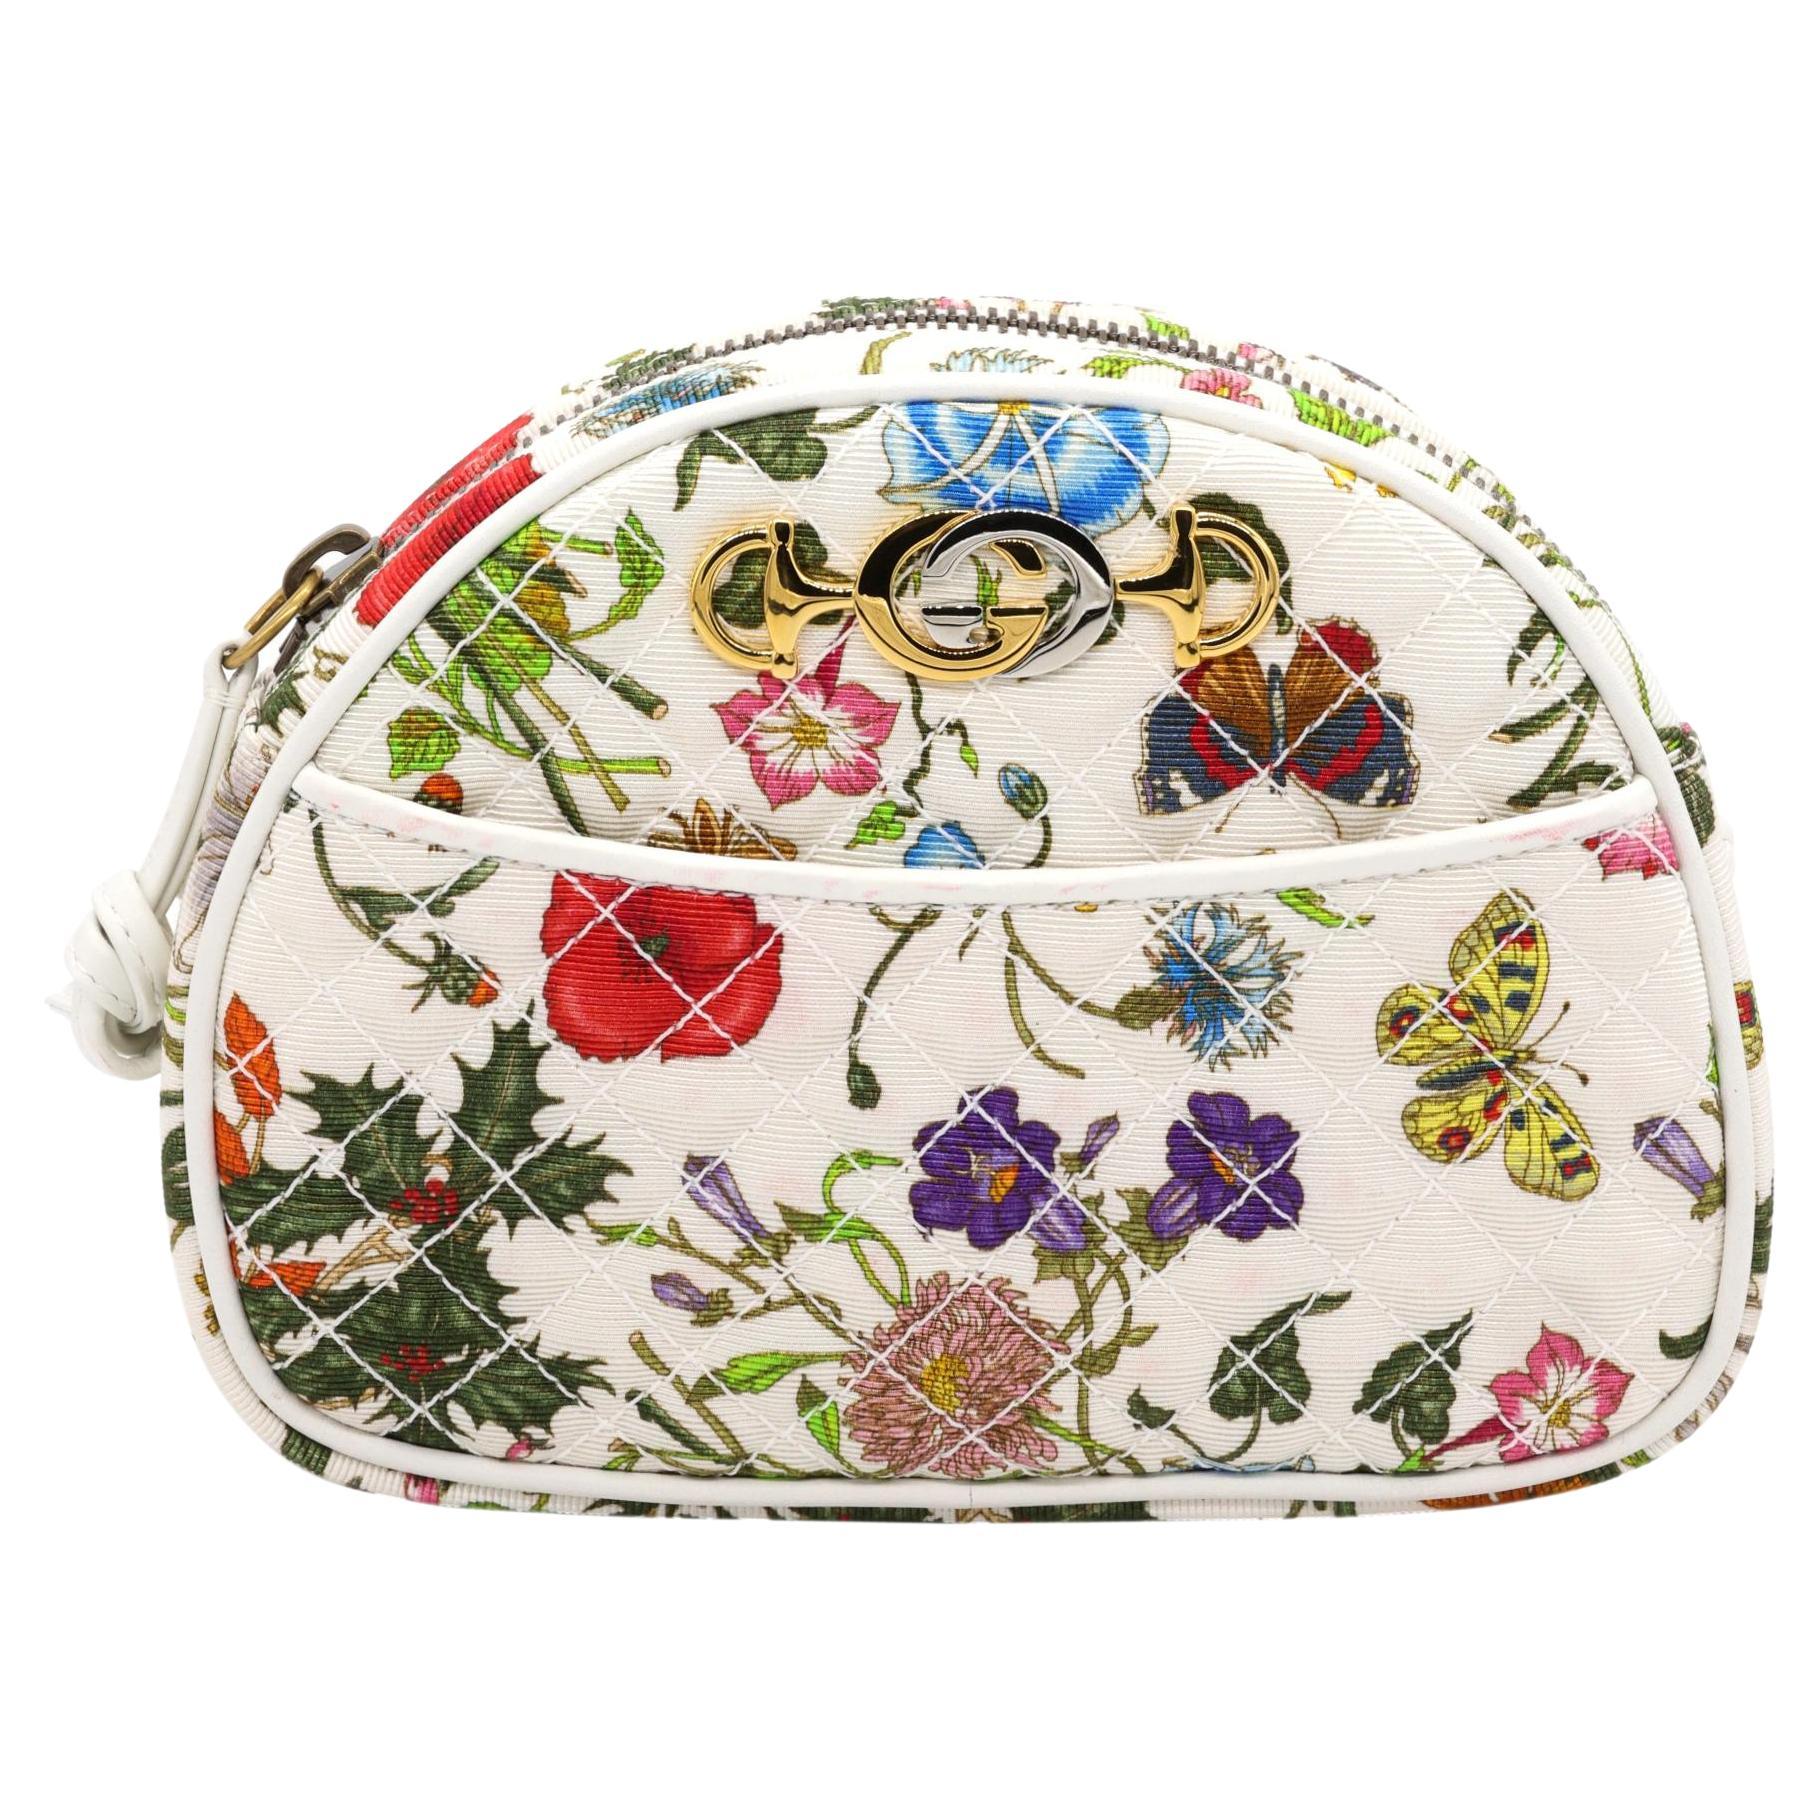 Gucci Trapuntata Quilted Floral Crossbody Bag with Multi-tonal Hardware, 2018.